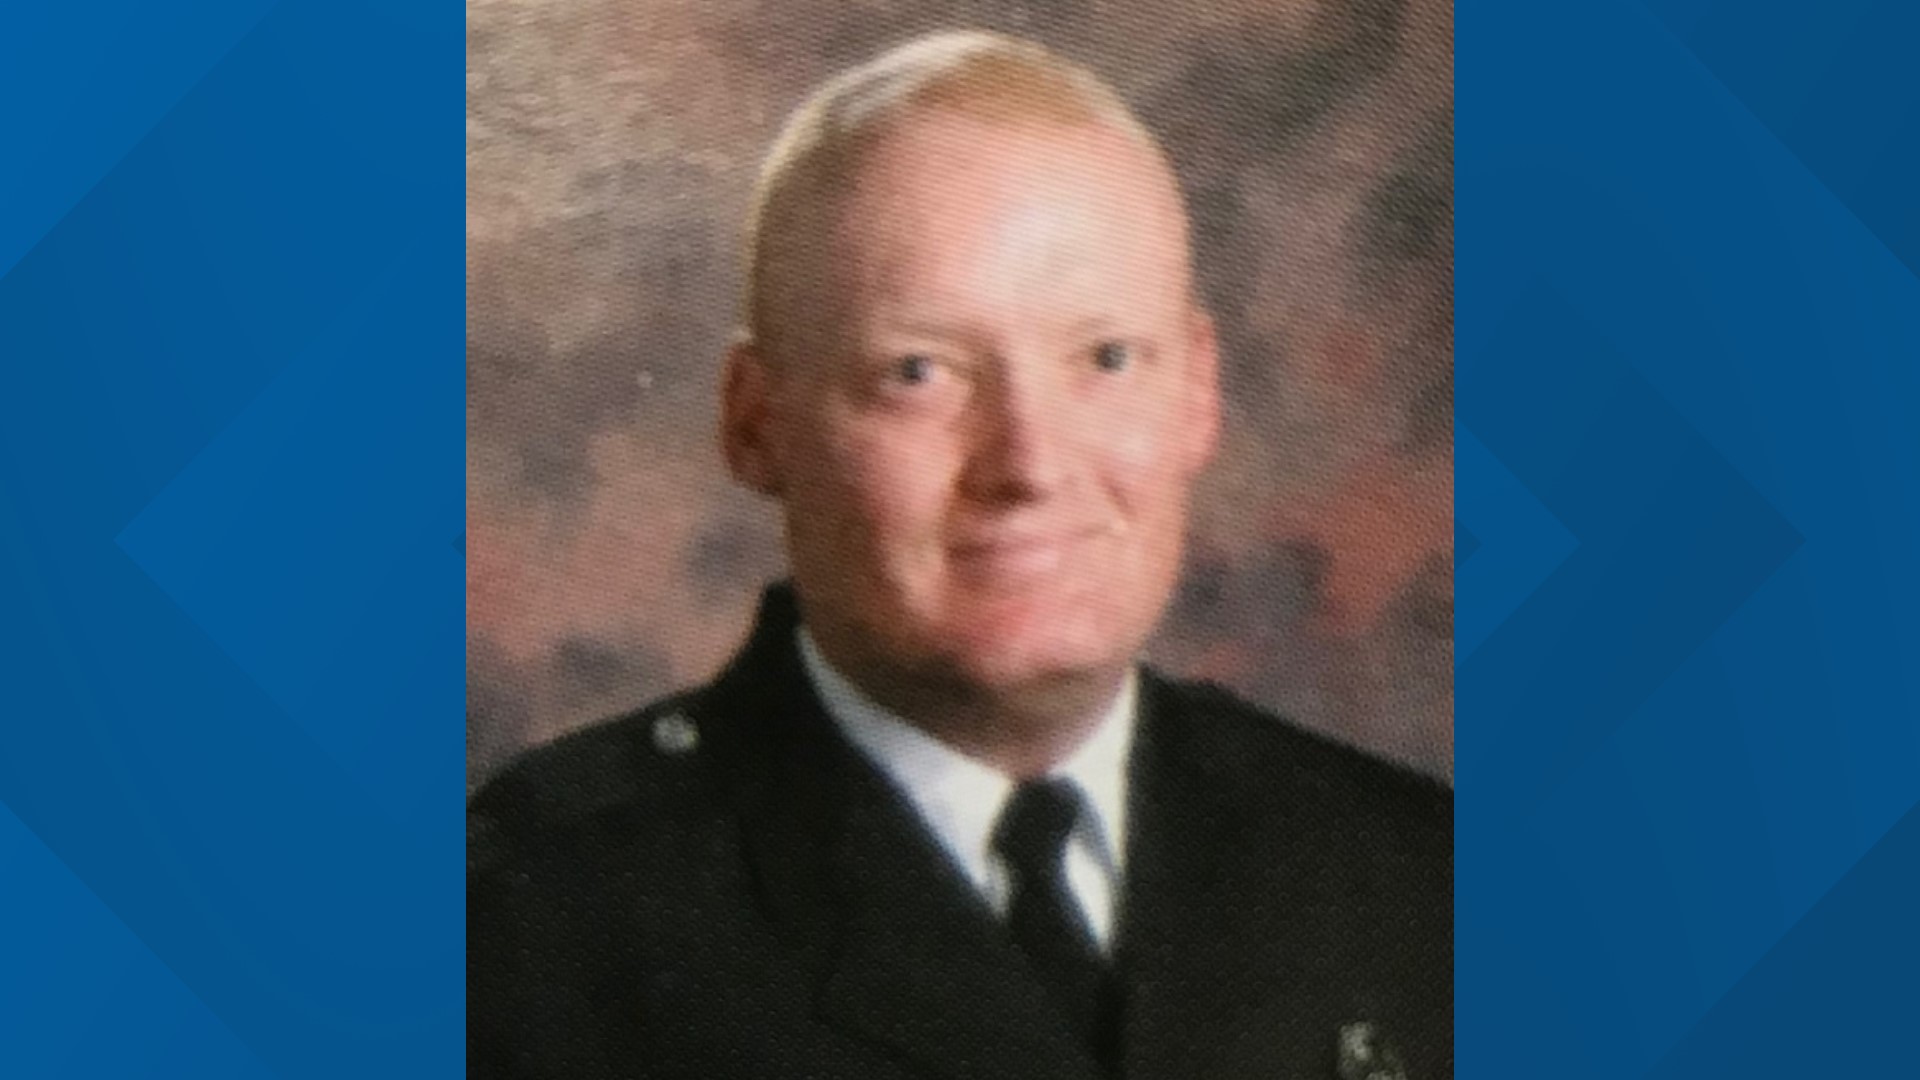 Jarvis died from COVID-19 sometime late Thursday or early Friday morning, according to Columbus Fire Battalion Chief Steve Martin.